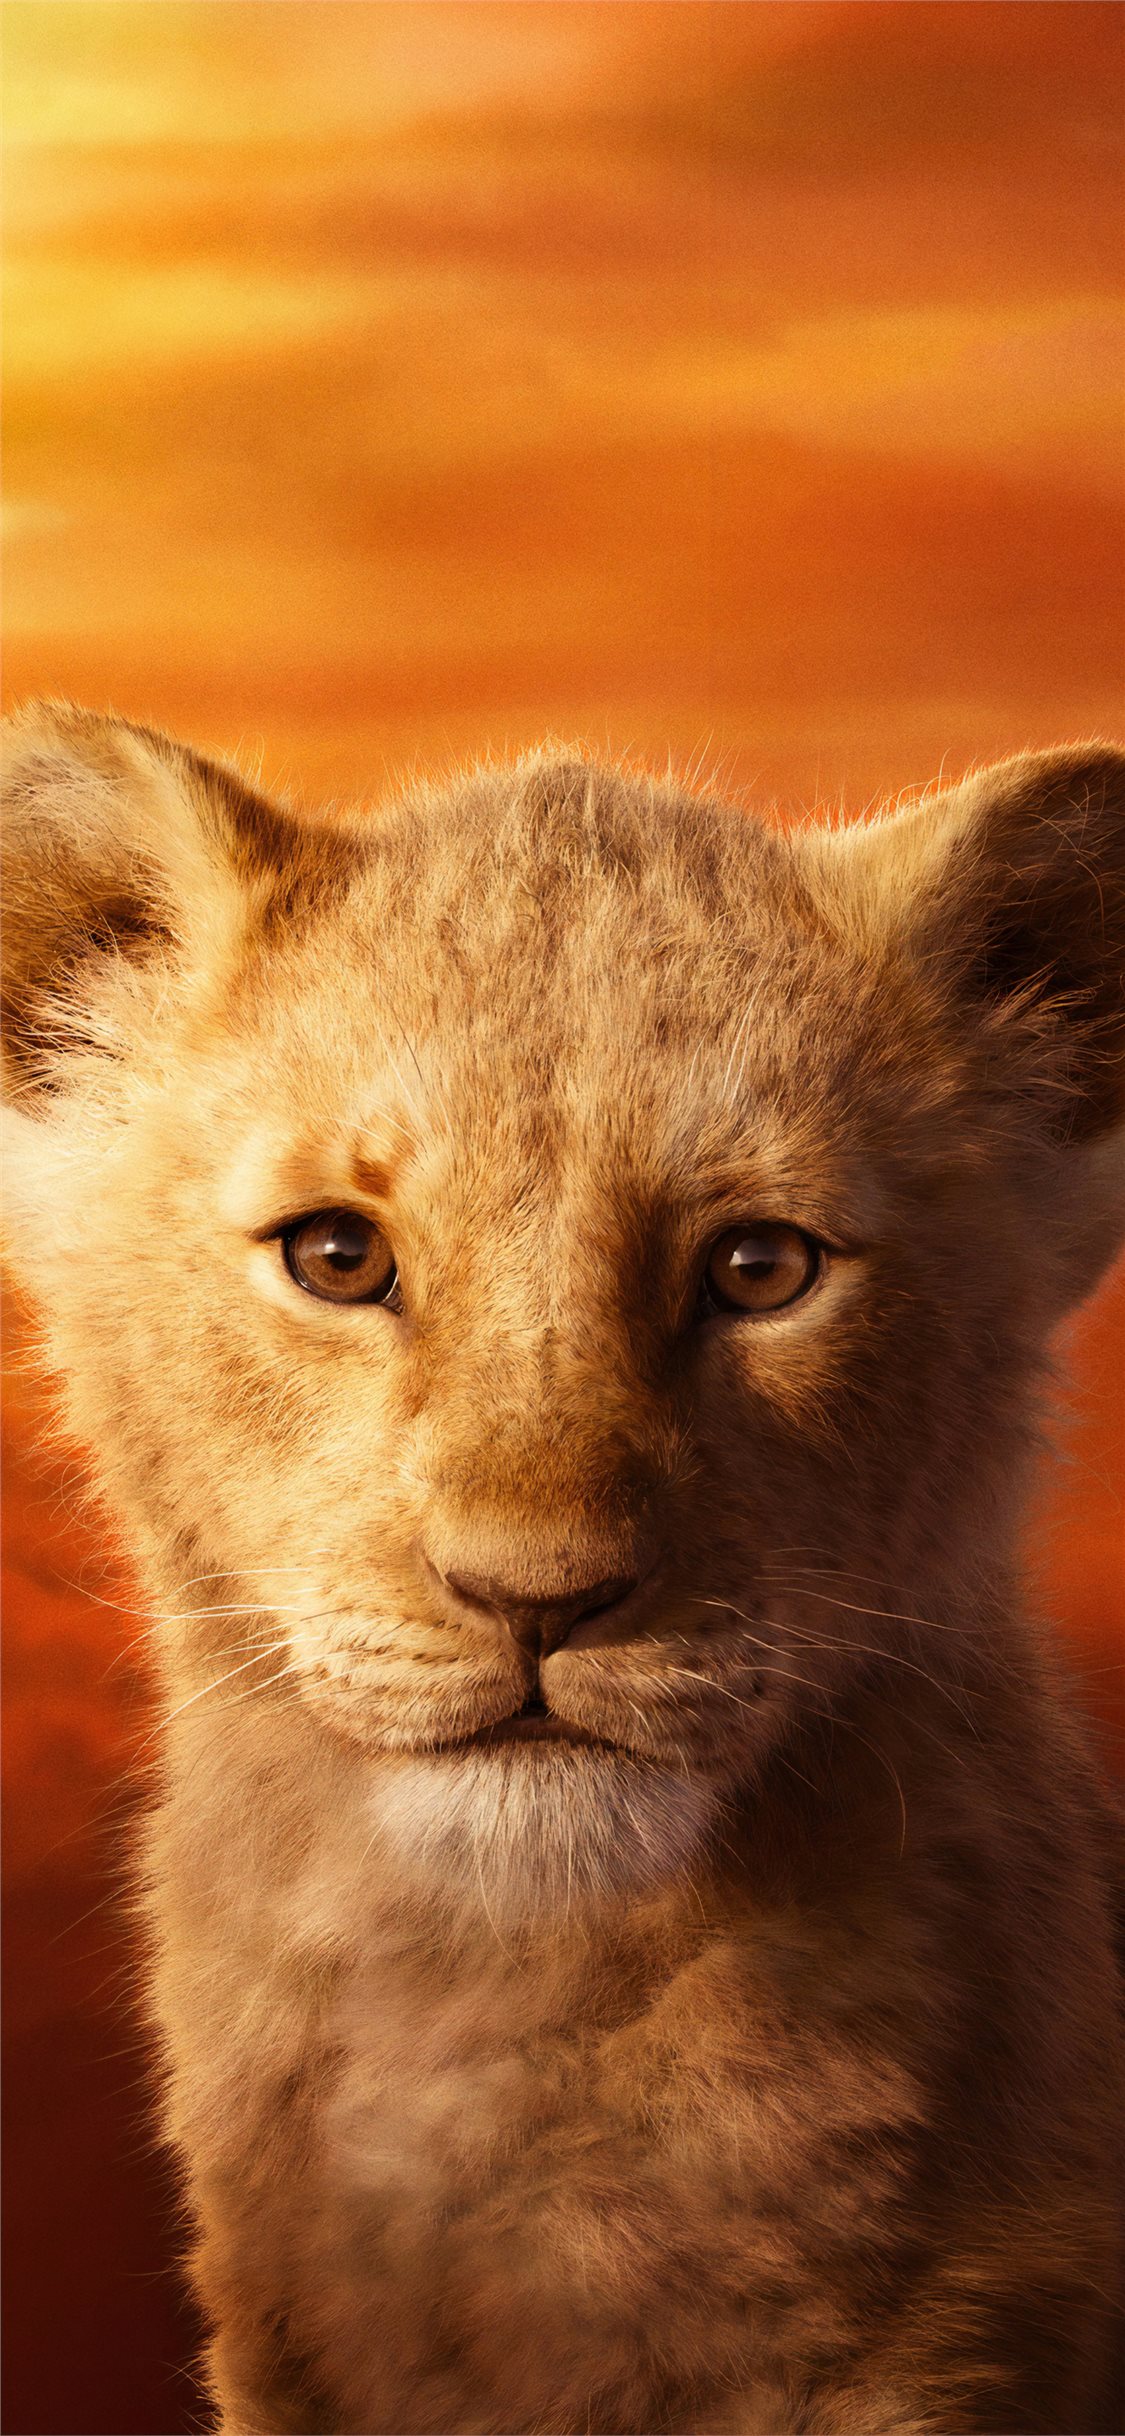 Jd Mccrary As Simba The Lion King 4k iPhone X Wallpaper